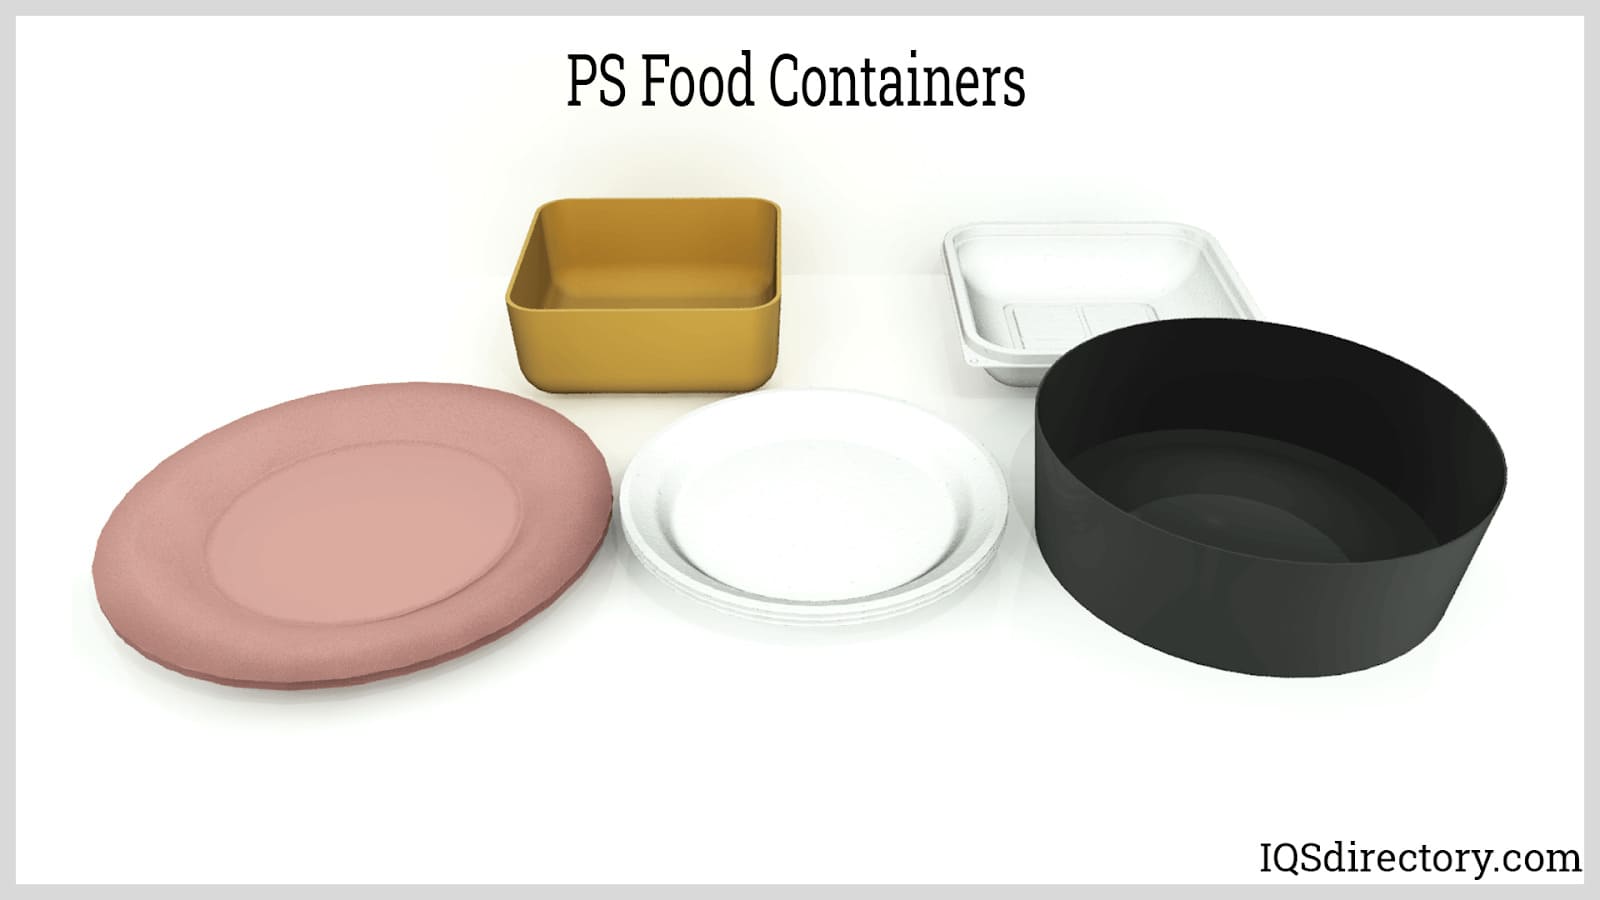 PS Food Containers